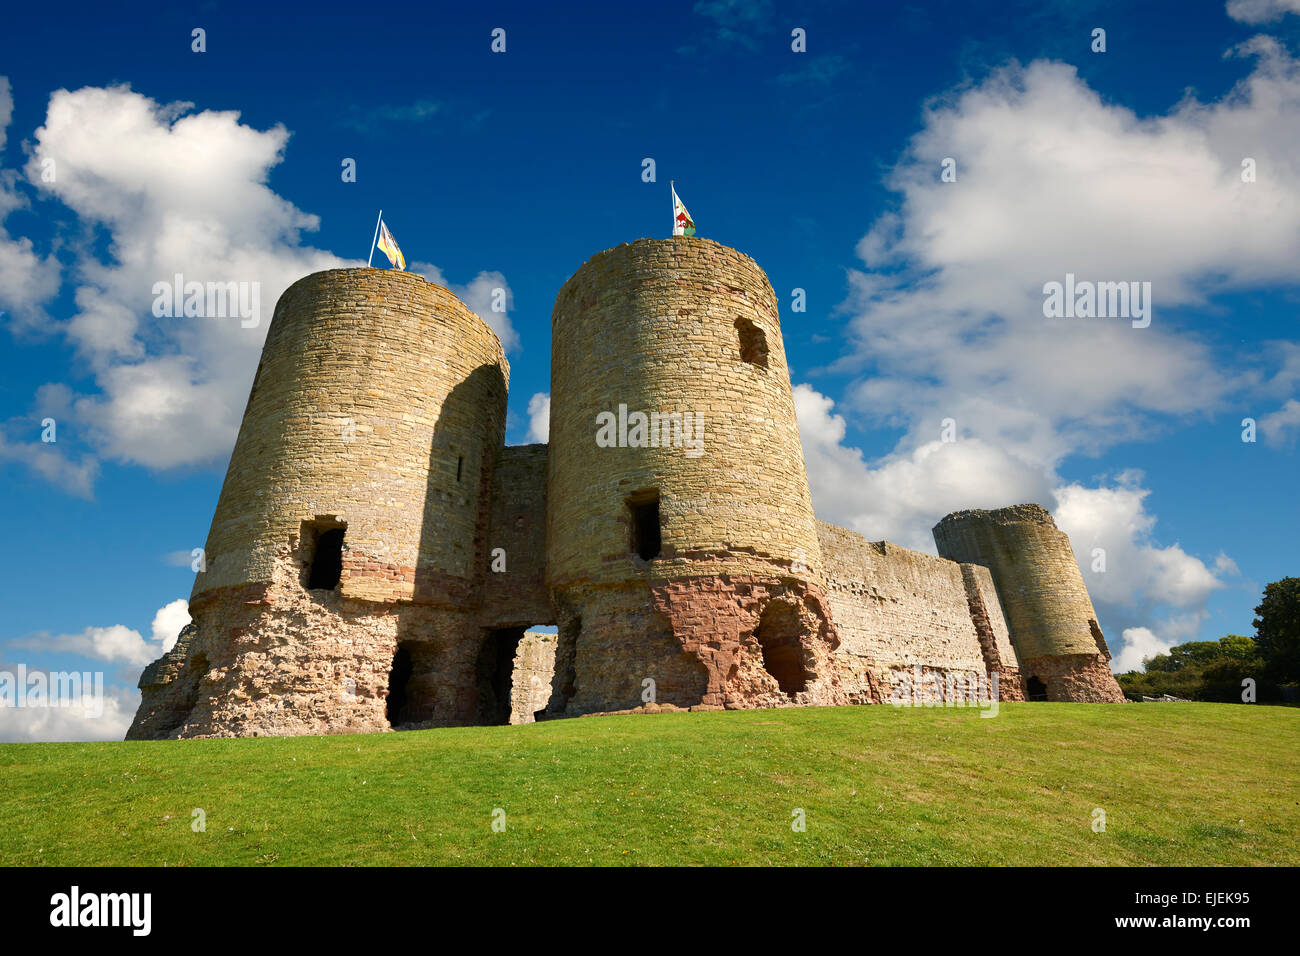 Rhuddlan Castle built in 1277 for Edward 1st next to the River Clwyd, Rhuddlan, Denbighshire, Wales Stock Photo